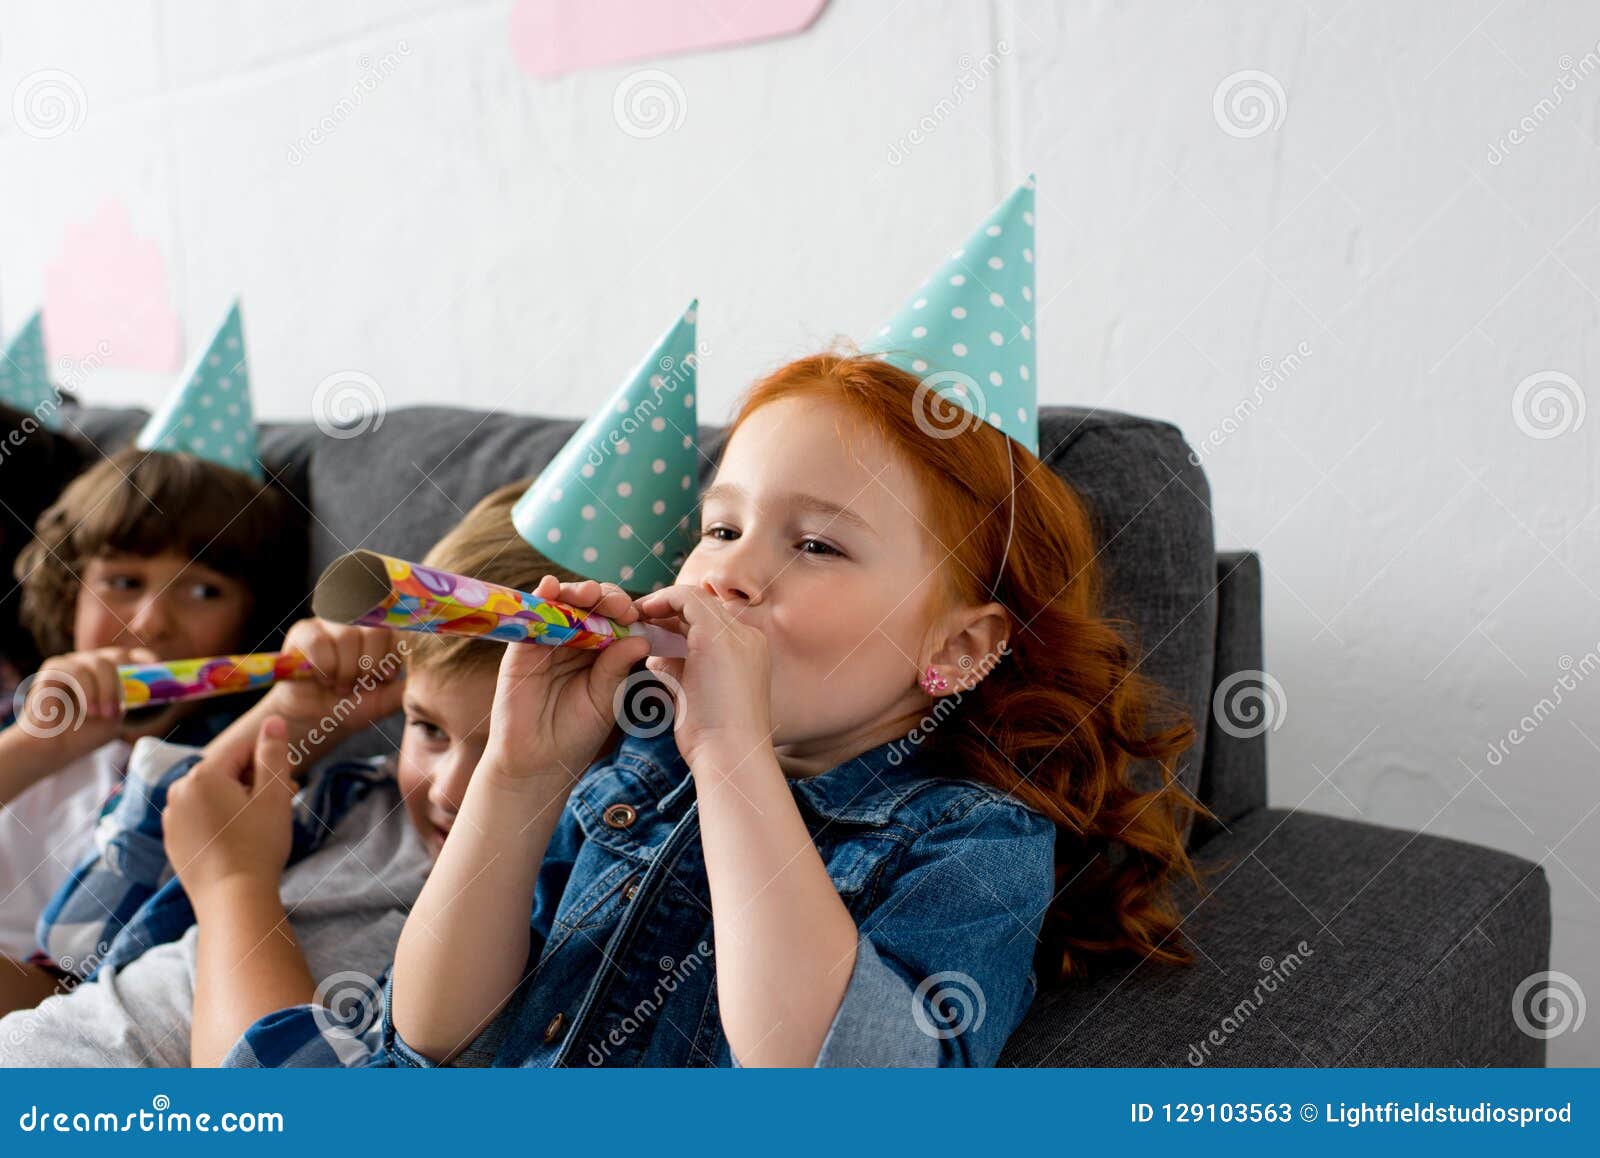 adorable little kids blowing in party blowers while sitting on sofa